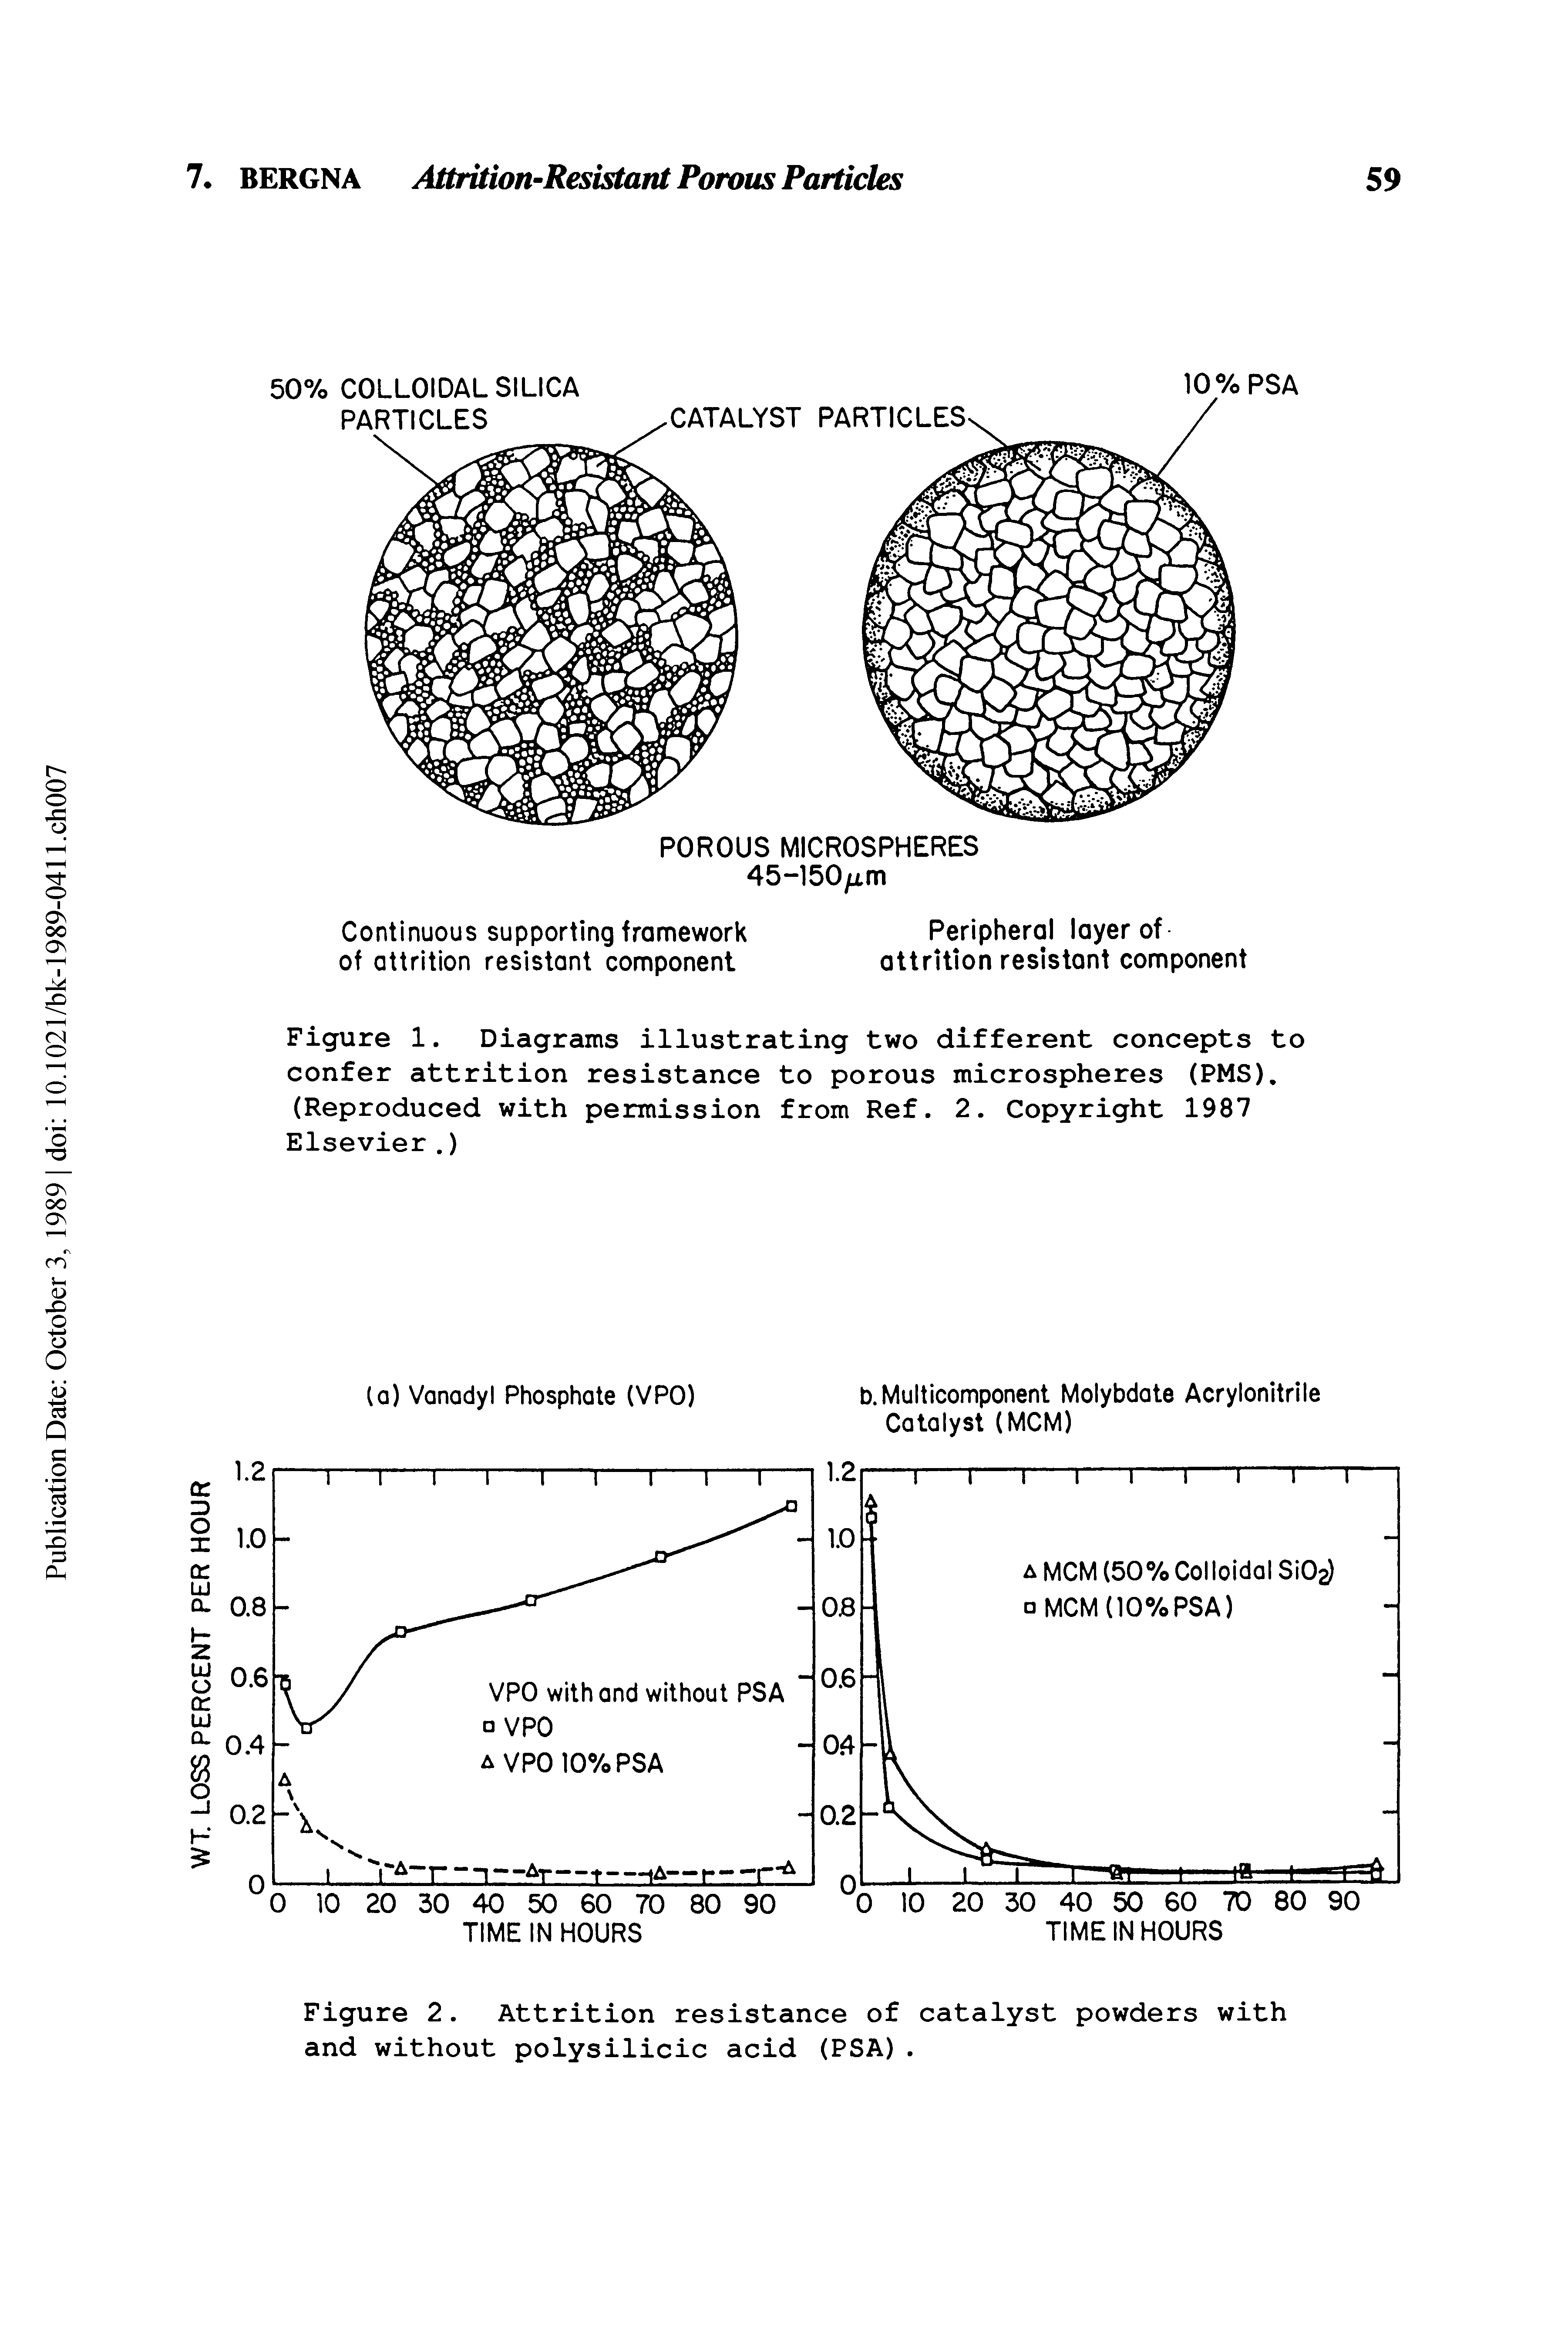 Figure 2. Attrition resistance of catalyst powders with and without polysilicic acid (PSA).